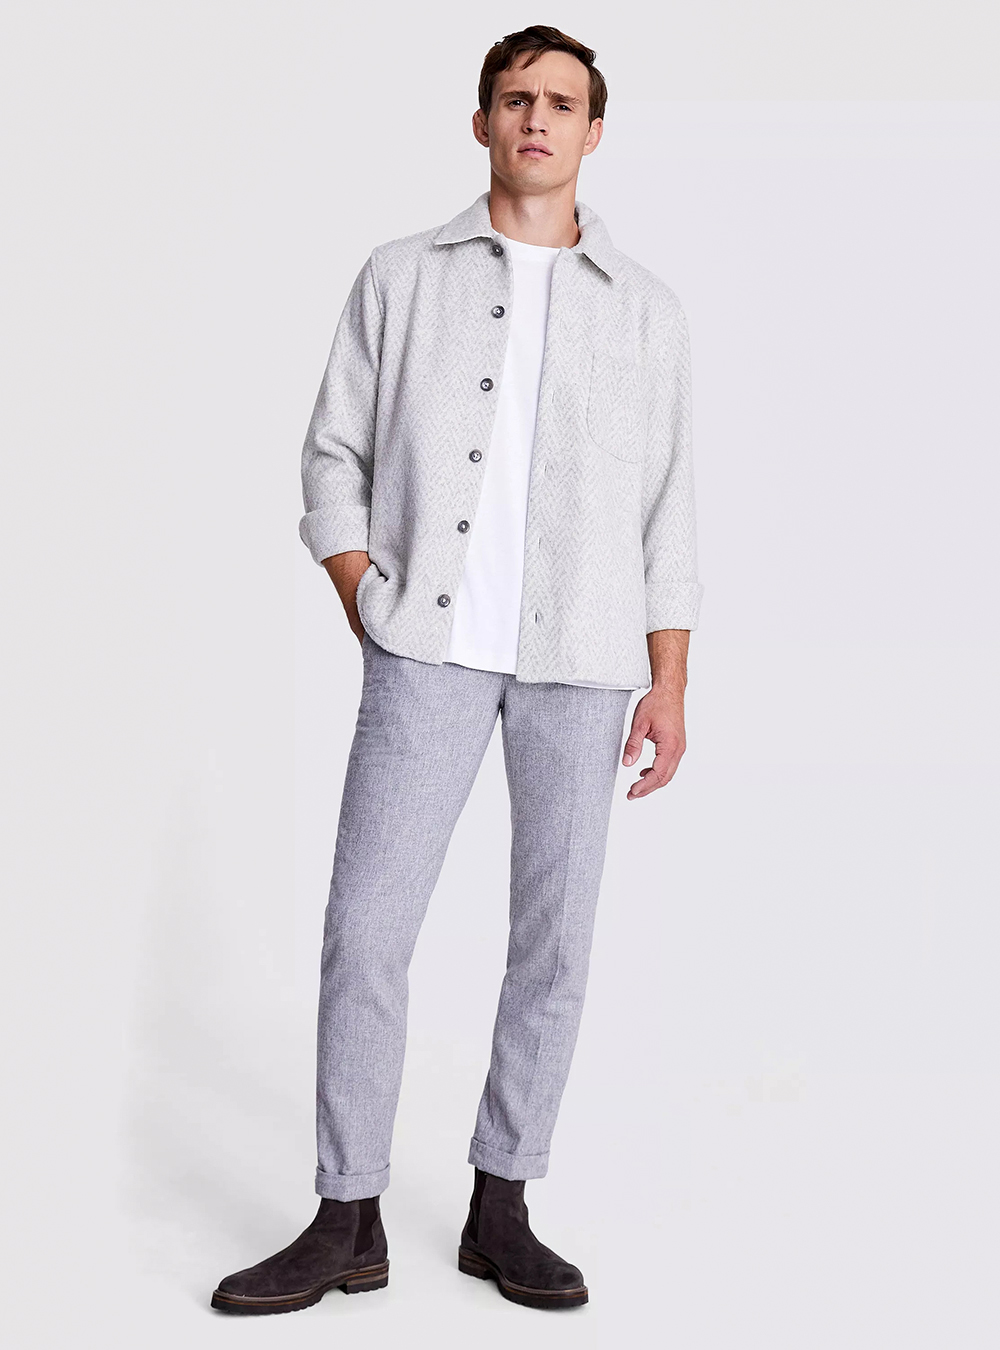 light grey overshirt, white t-shirt, grey pants, and brown suede chelsea boots